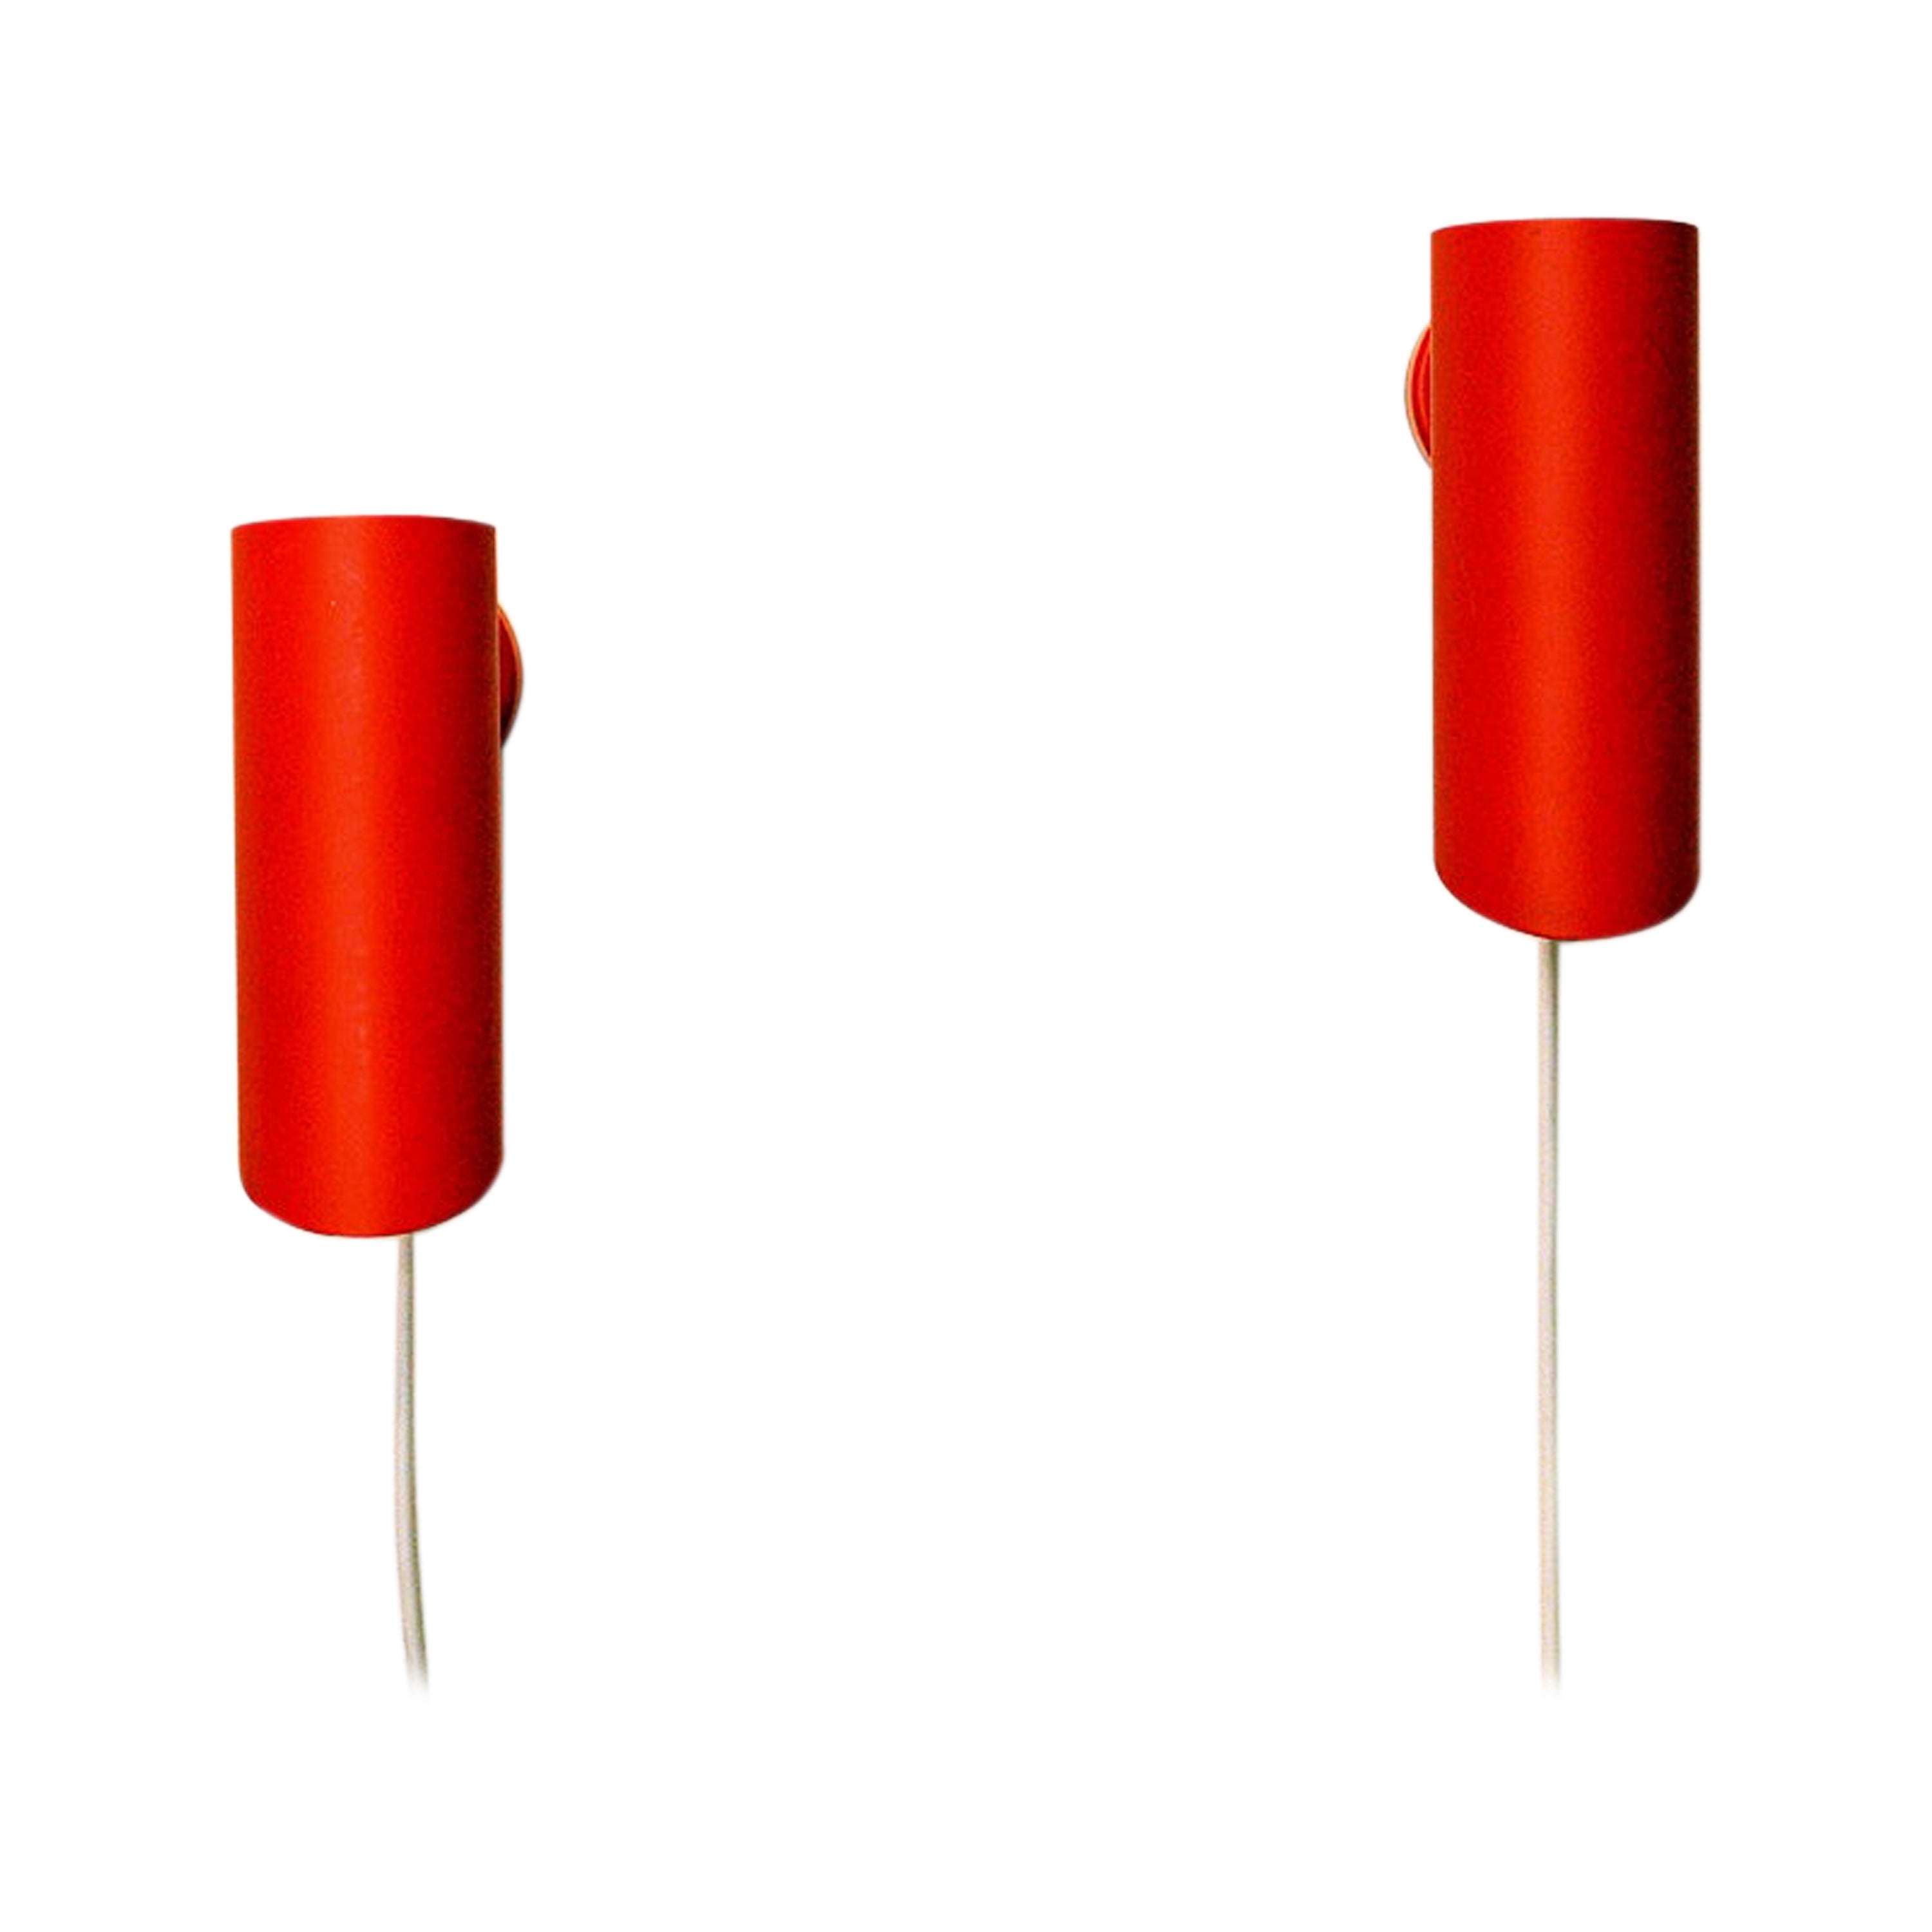 Lovely orange colored metal pair of wall lamps made by Svend Middelboe for Nordisk Solar - Denmark in the 1960s. These decorative cylinder shaped wall lamps have a white inside and the light switch placed on the wall base. They are great as a pair